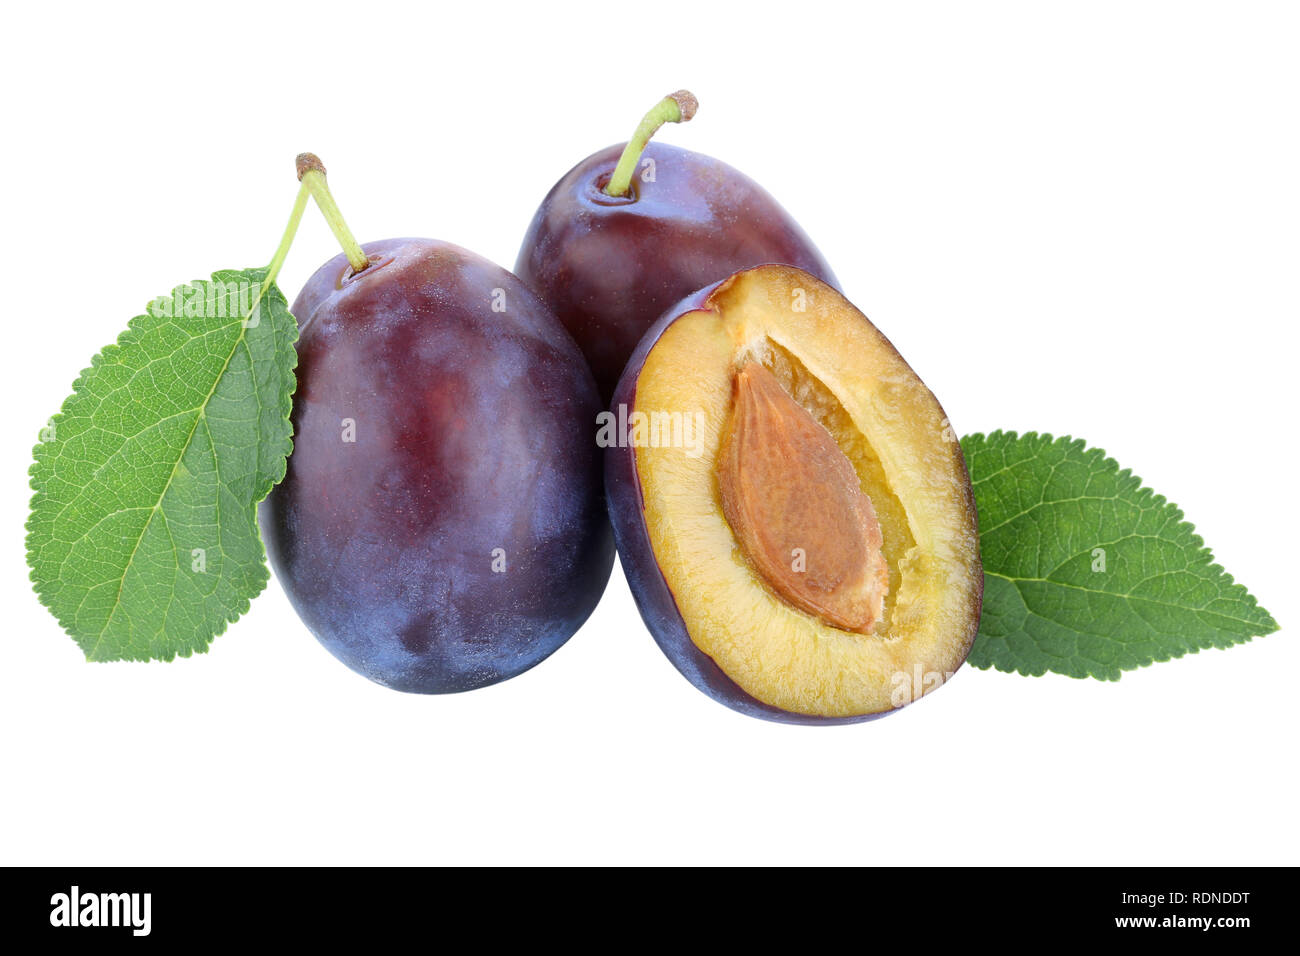 Plums plum prunes prune fresh fruits fruit autumn fall isolated on a white background Stock Photo